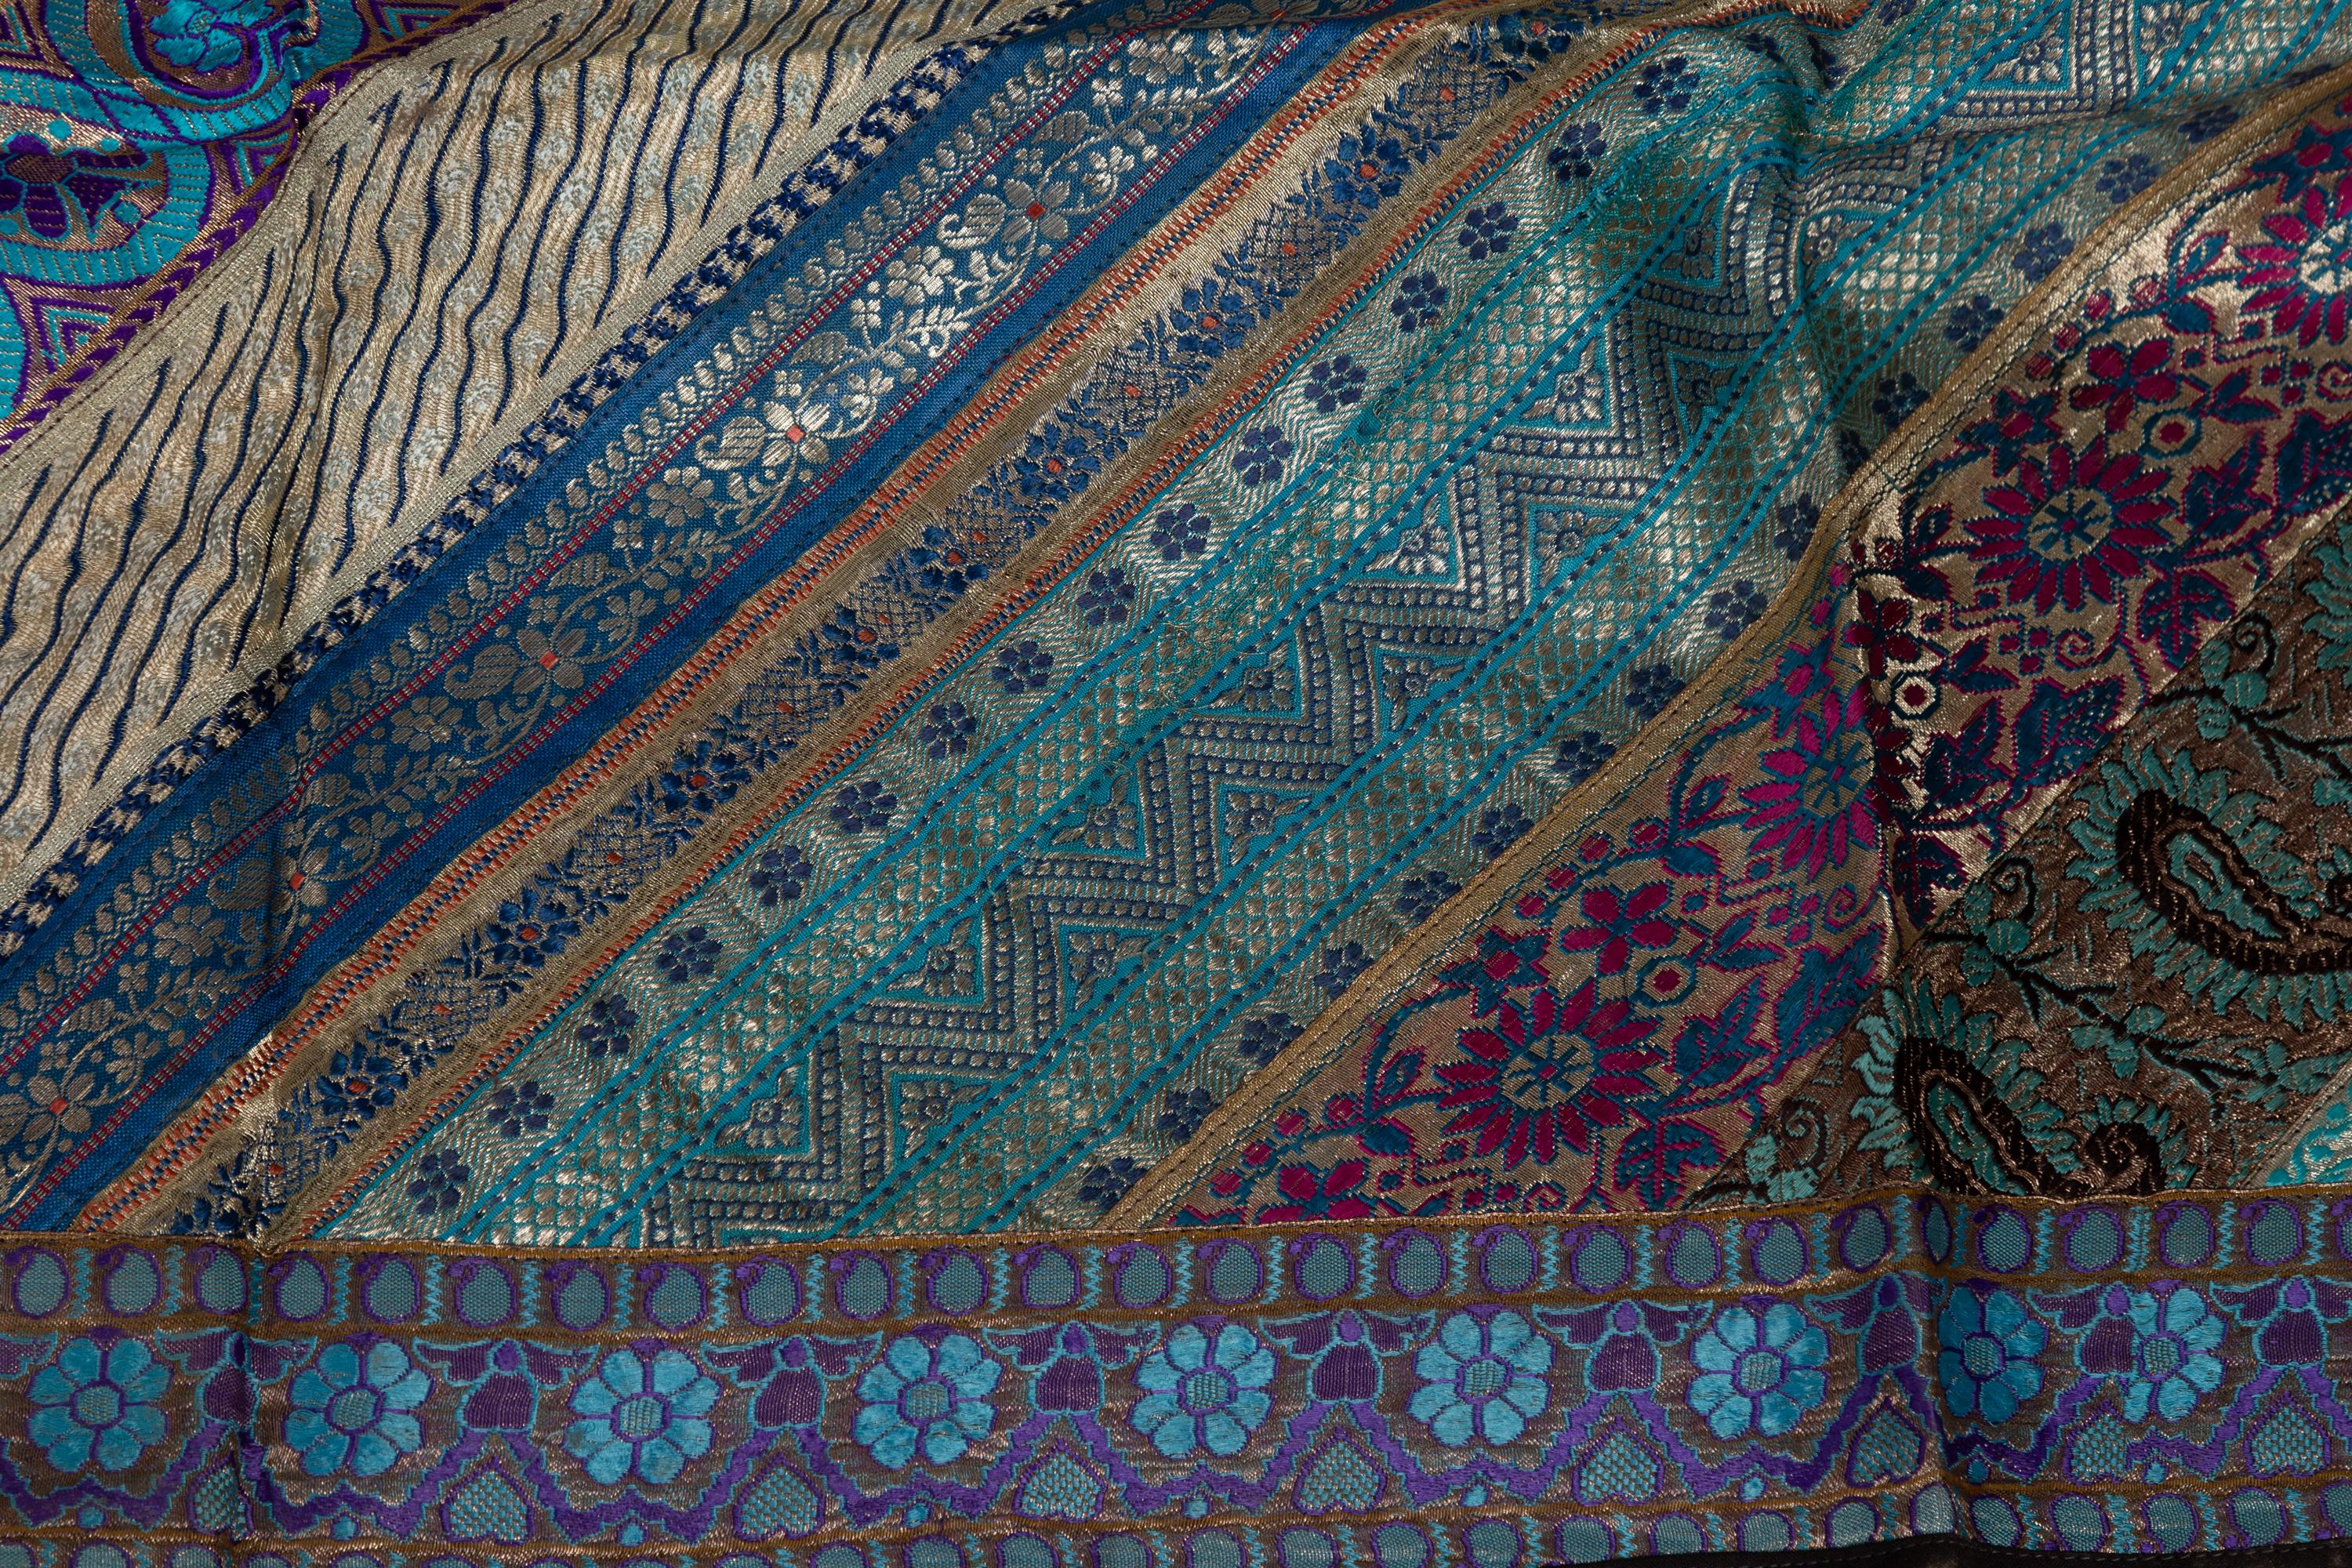 Vintage Indian Silk Embroidered Fabric with Turquoise, Violet and Gold Tones 2